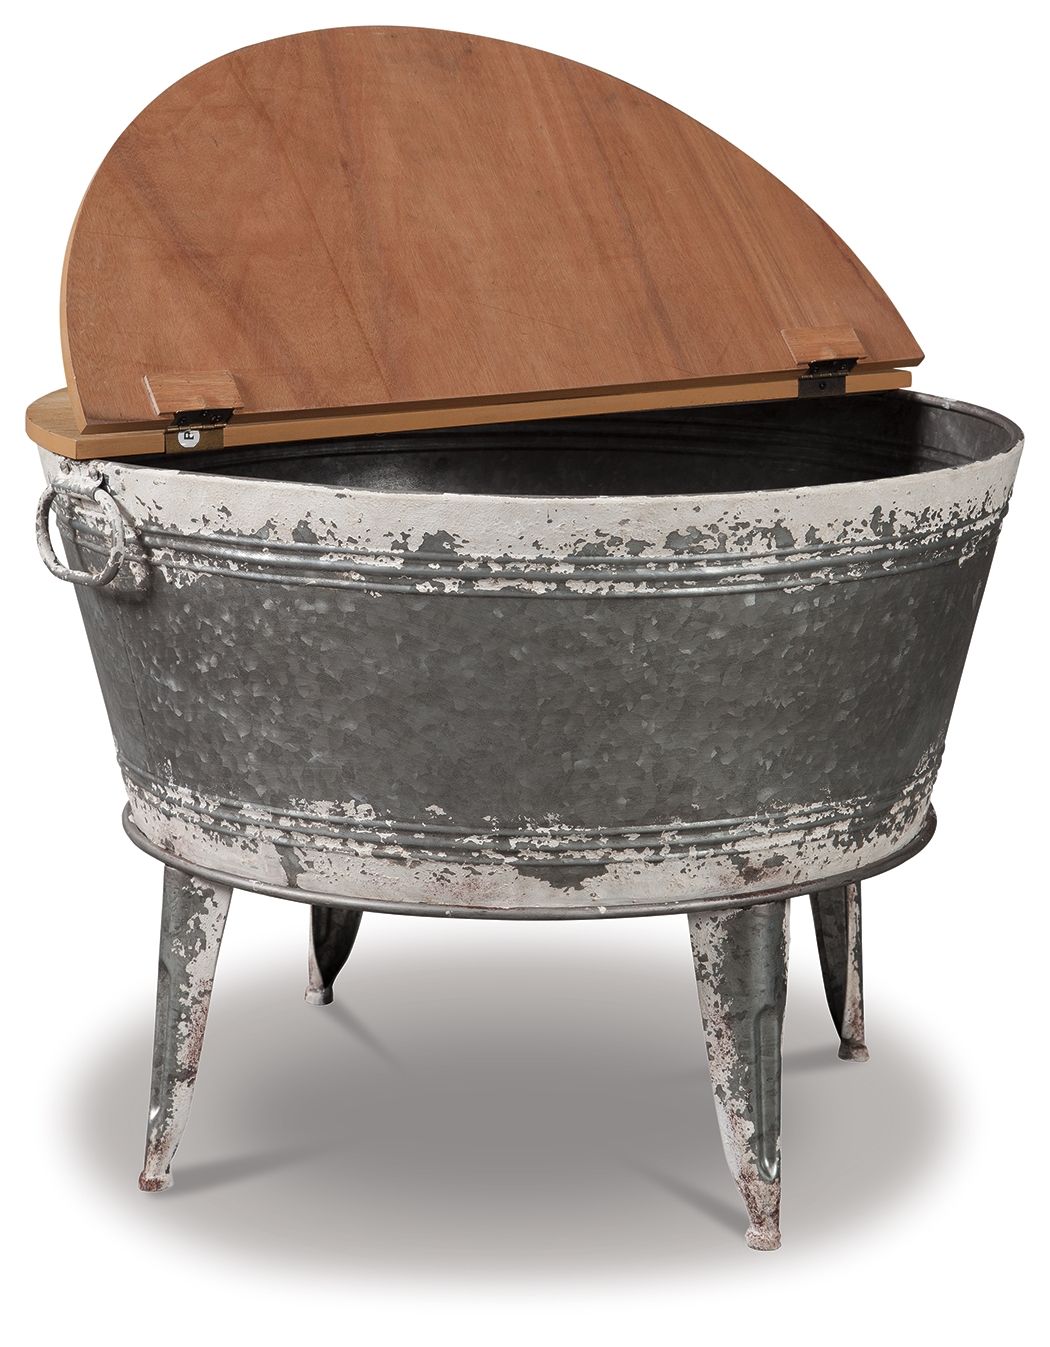 Shellmond - Metallic / Brown / Beige - Accent Cocktail Table - Tony's Home Furnishings